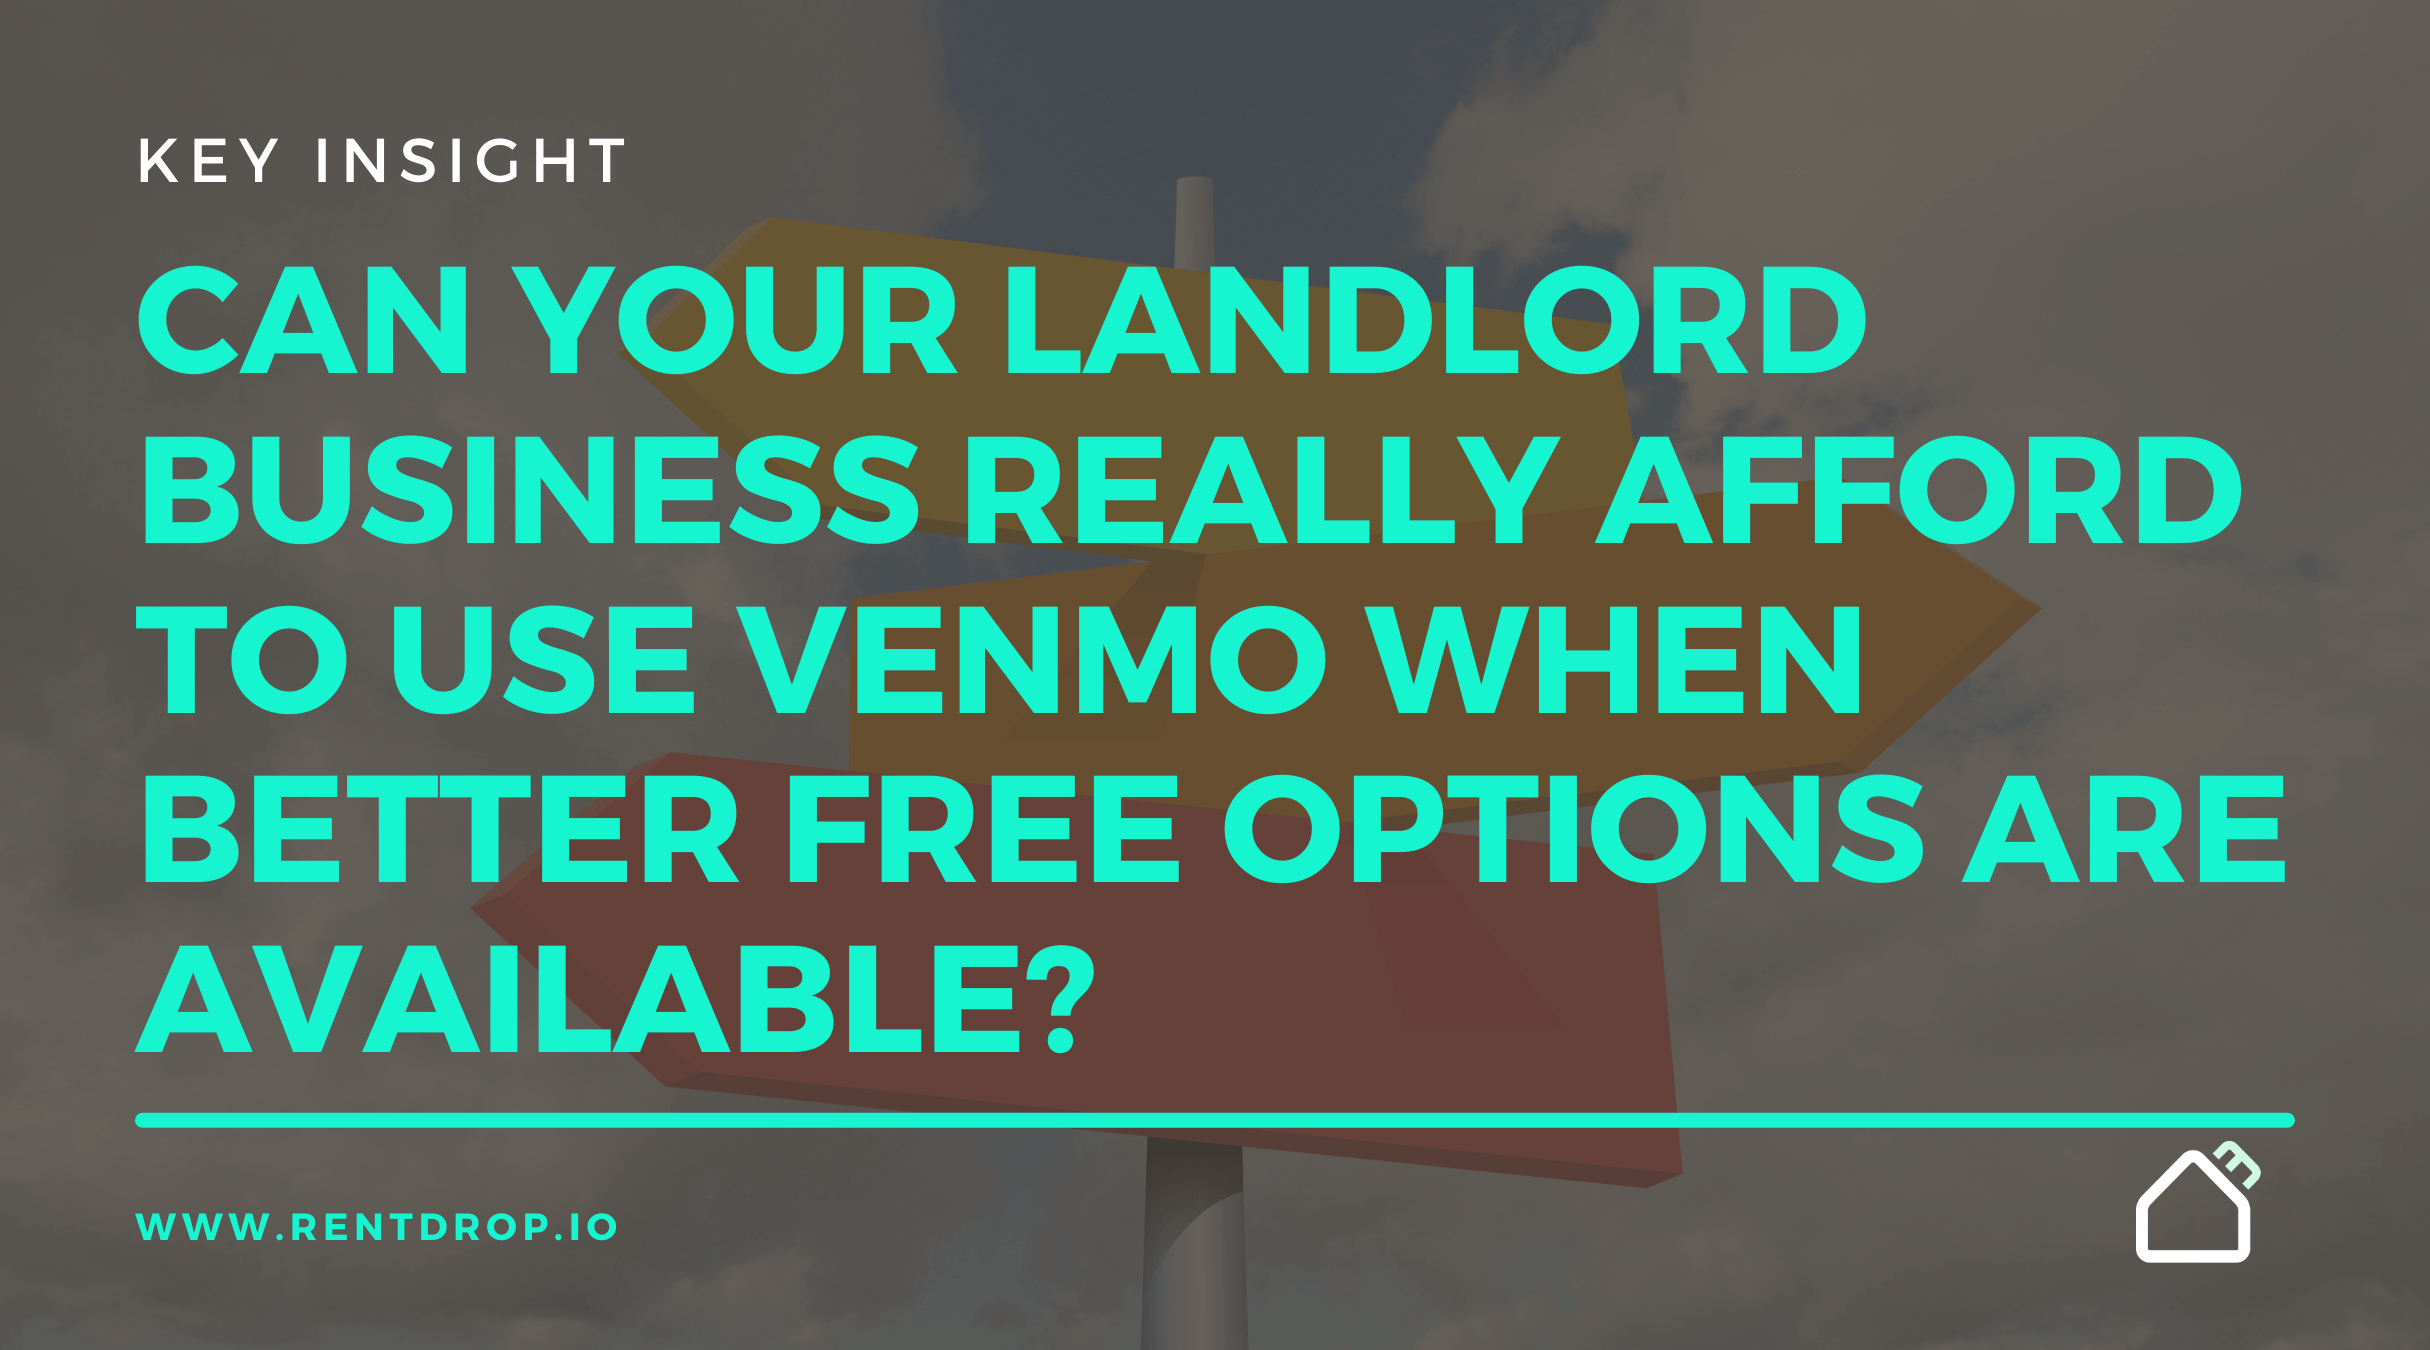 venmo for rent payments rentdrop key insight